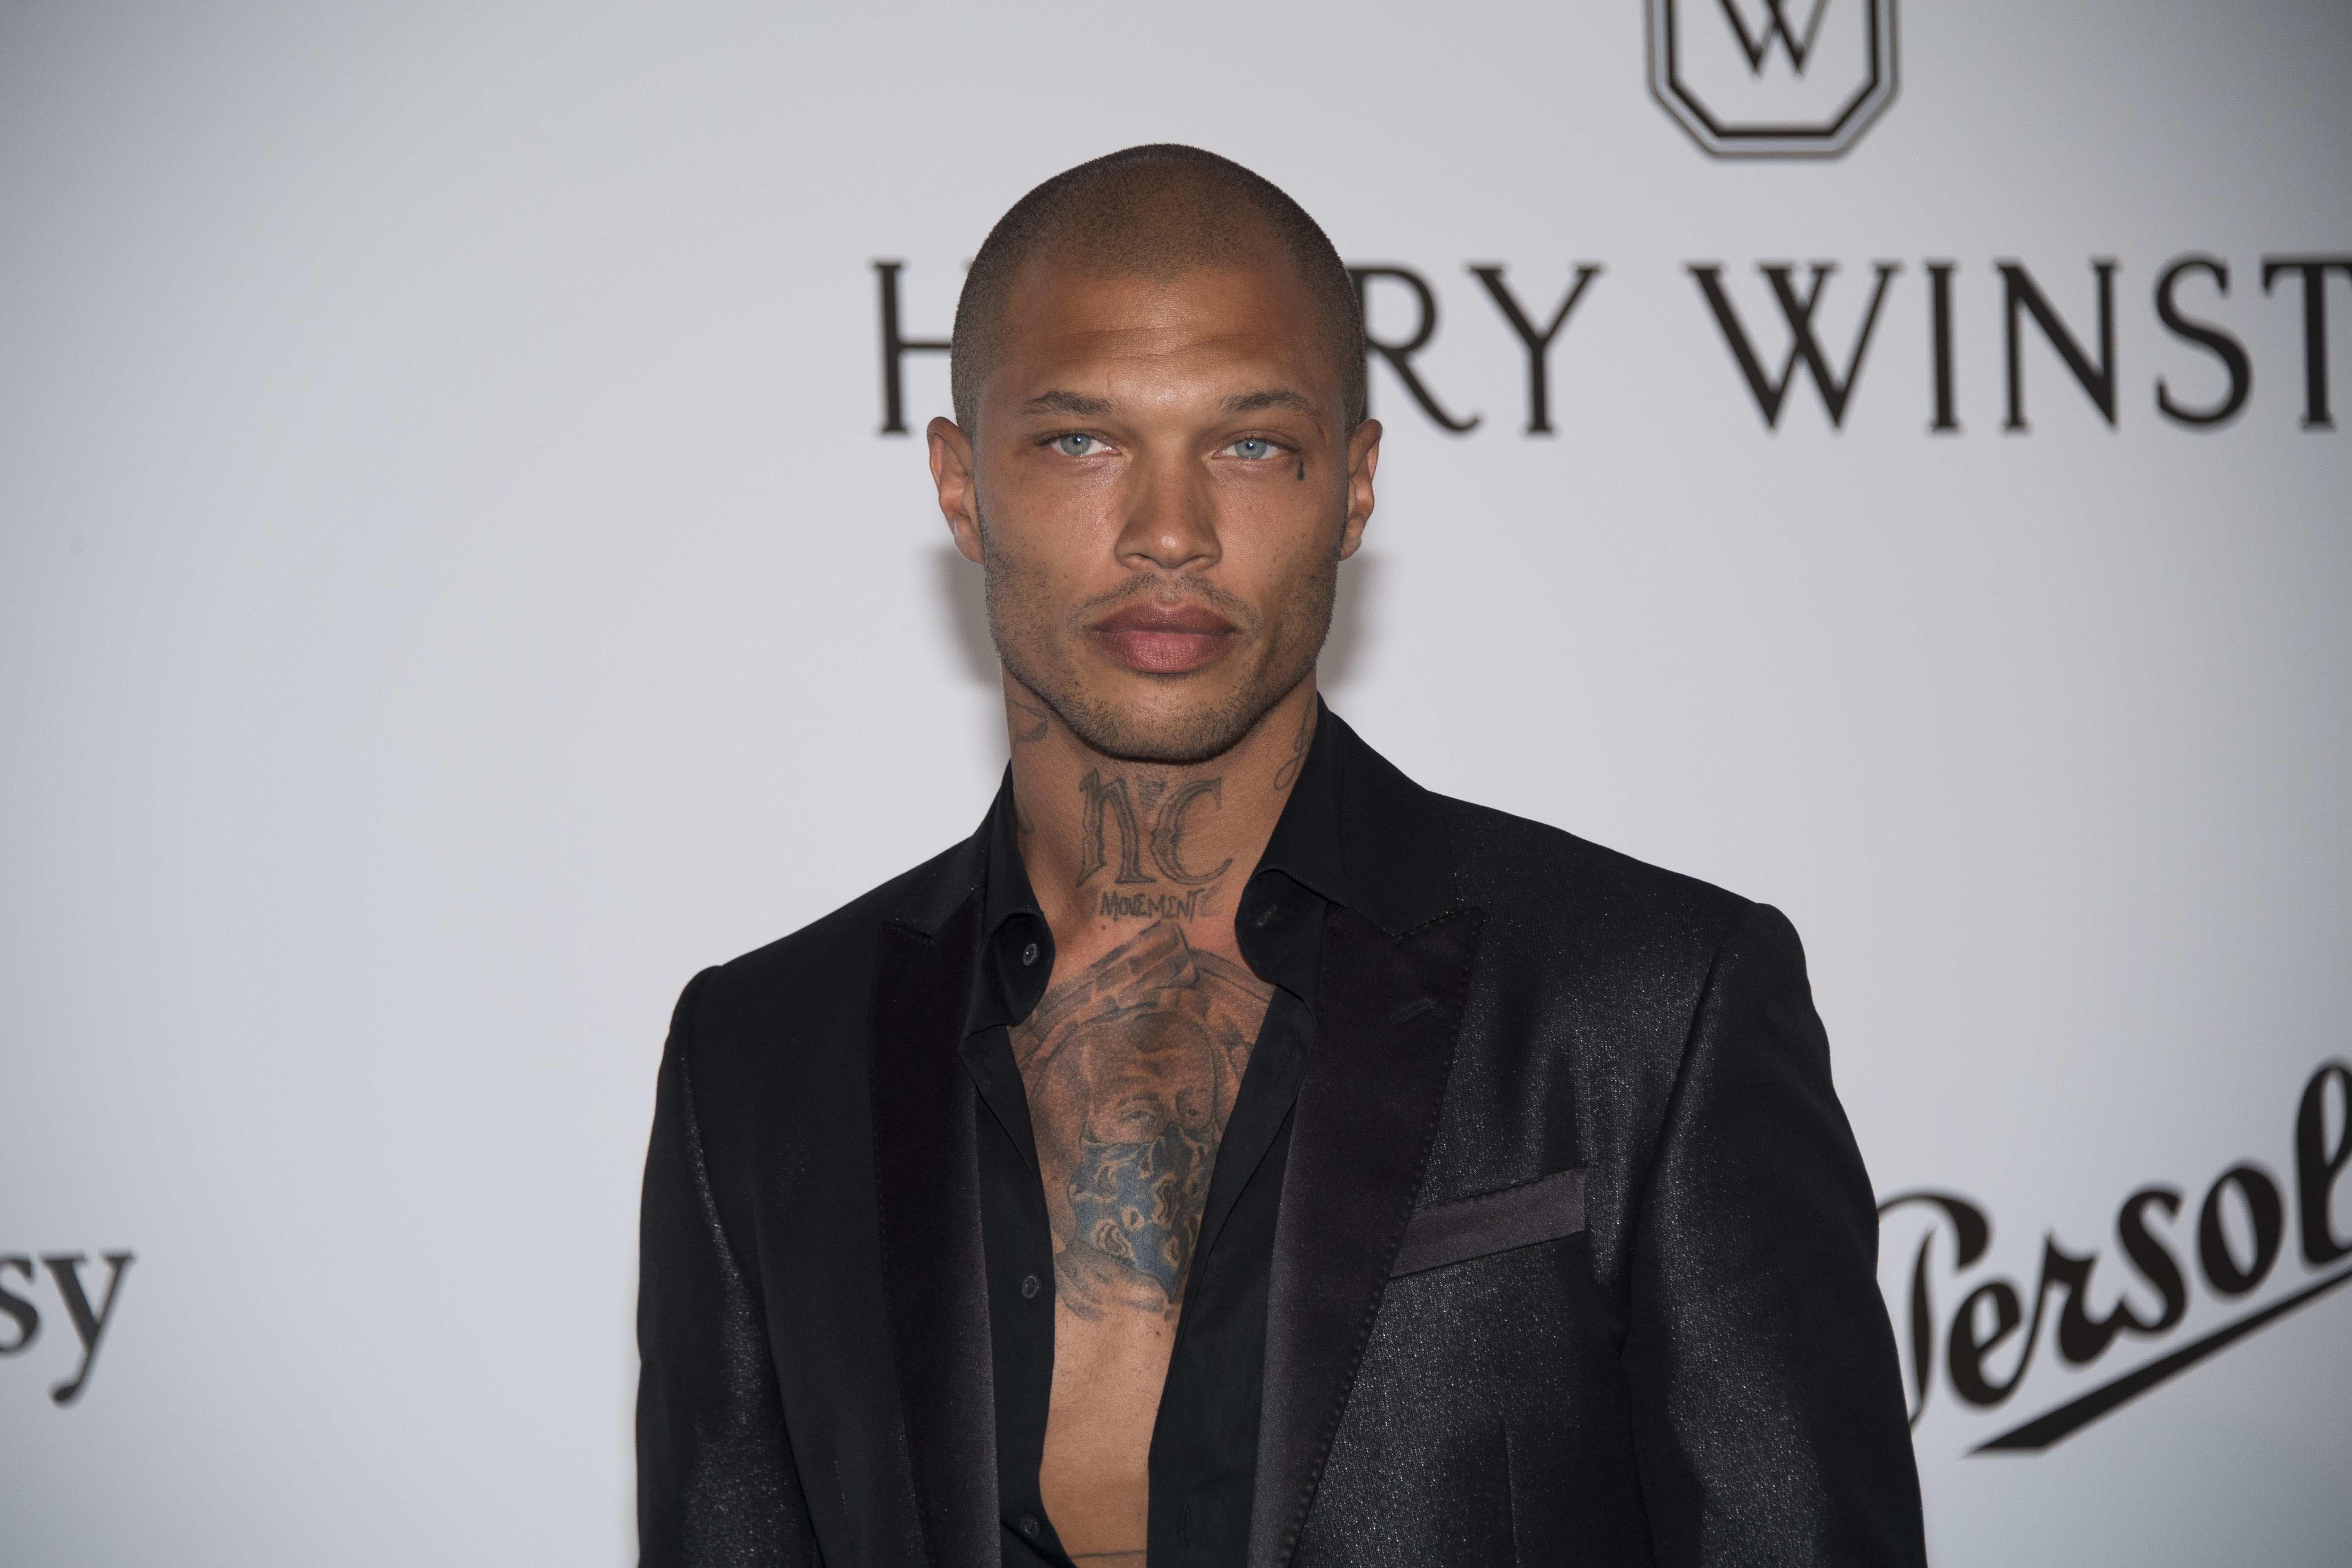 45-facts-about-jeremy-meeks-1688821839.jpg